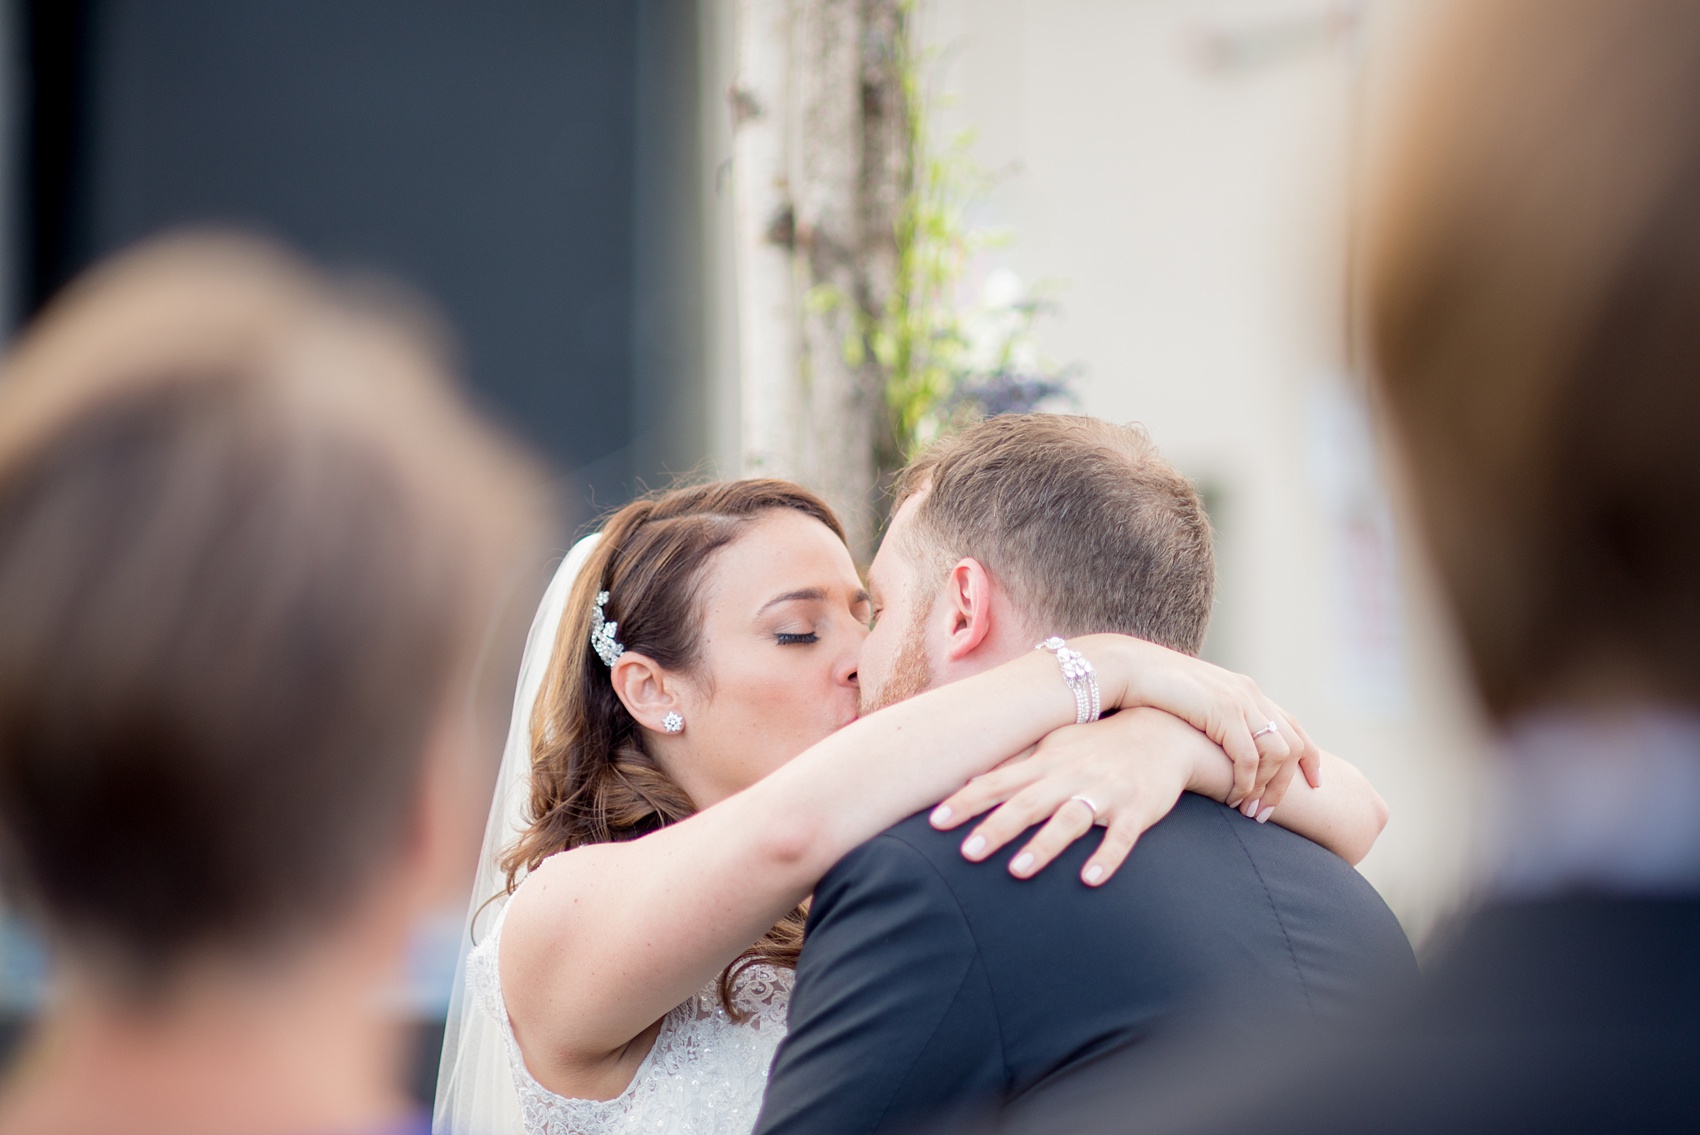 Mikkel Paige Photography photos of a NYC wedding at Tribeca Rooftop. An image of the outdoor ceremony first kiss!